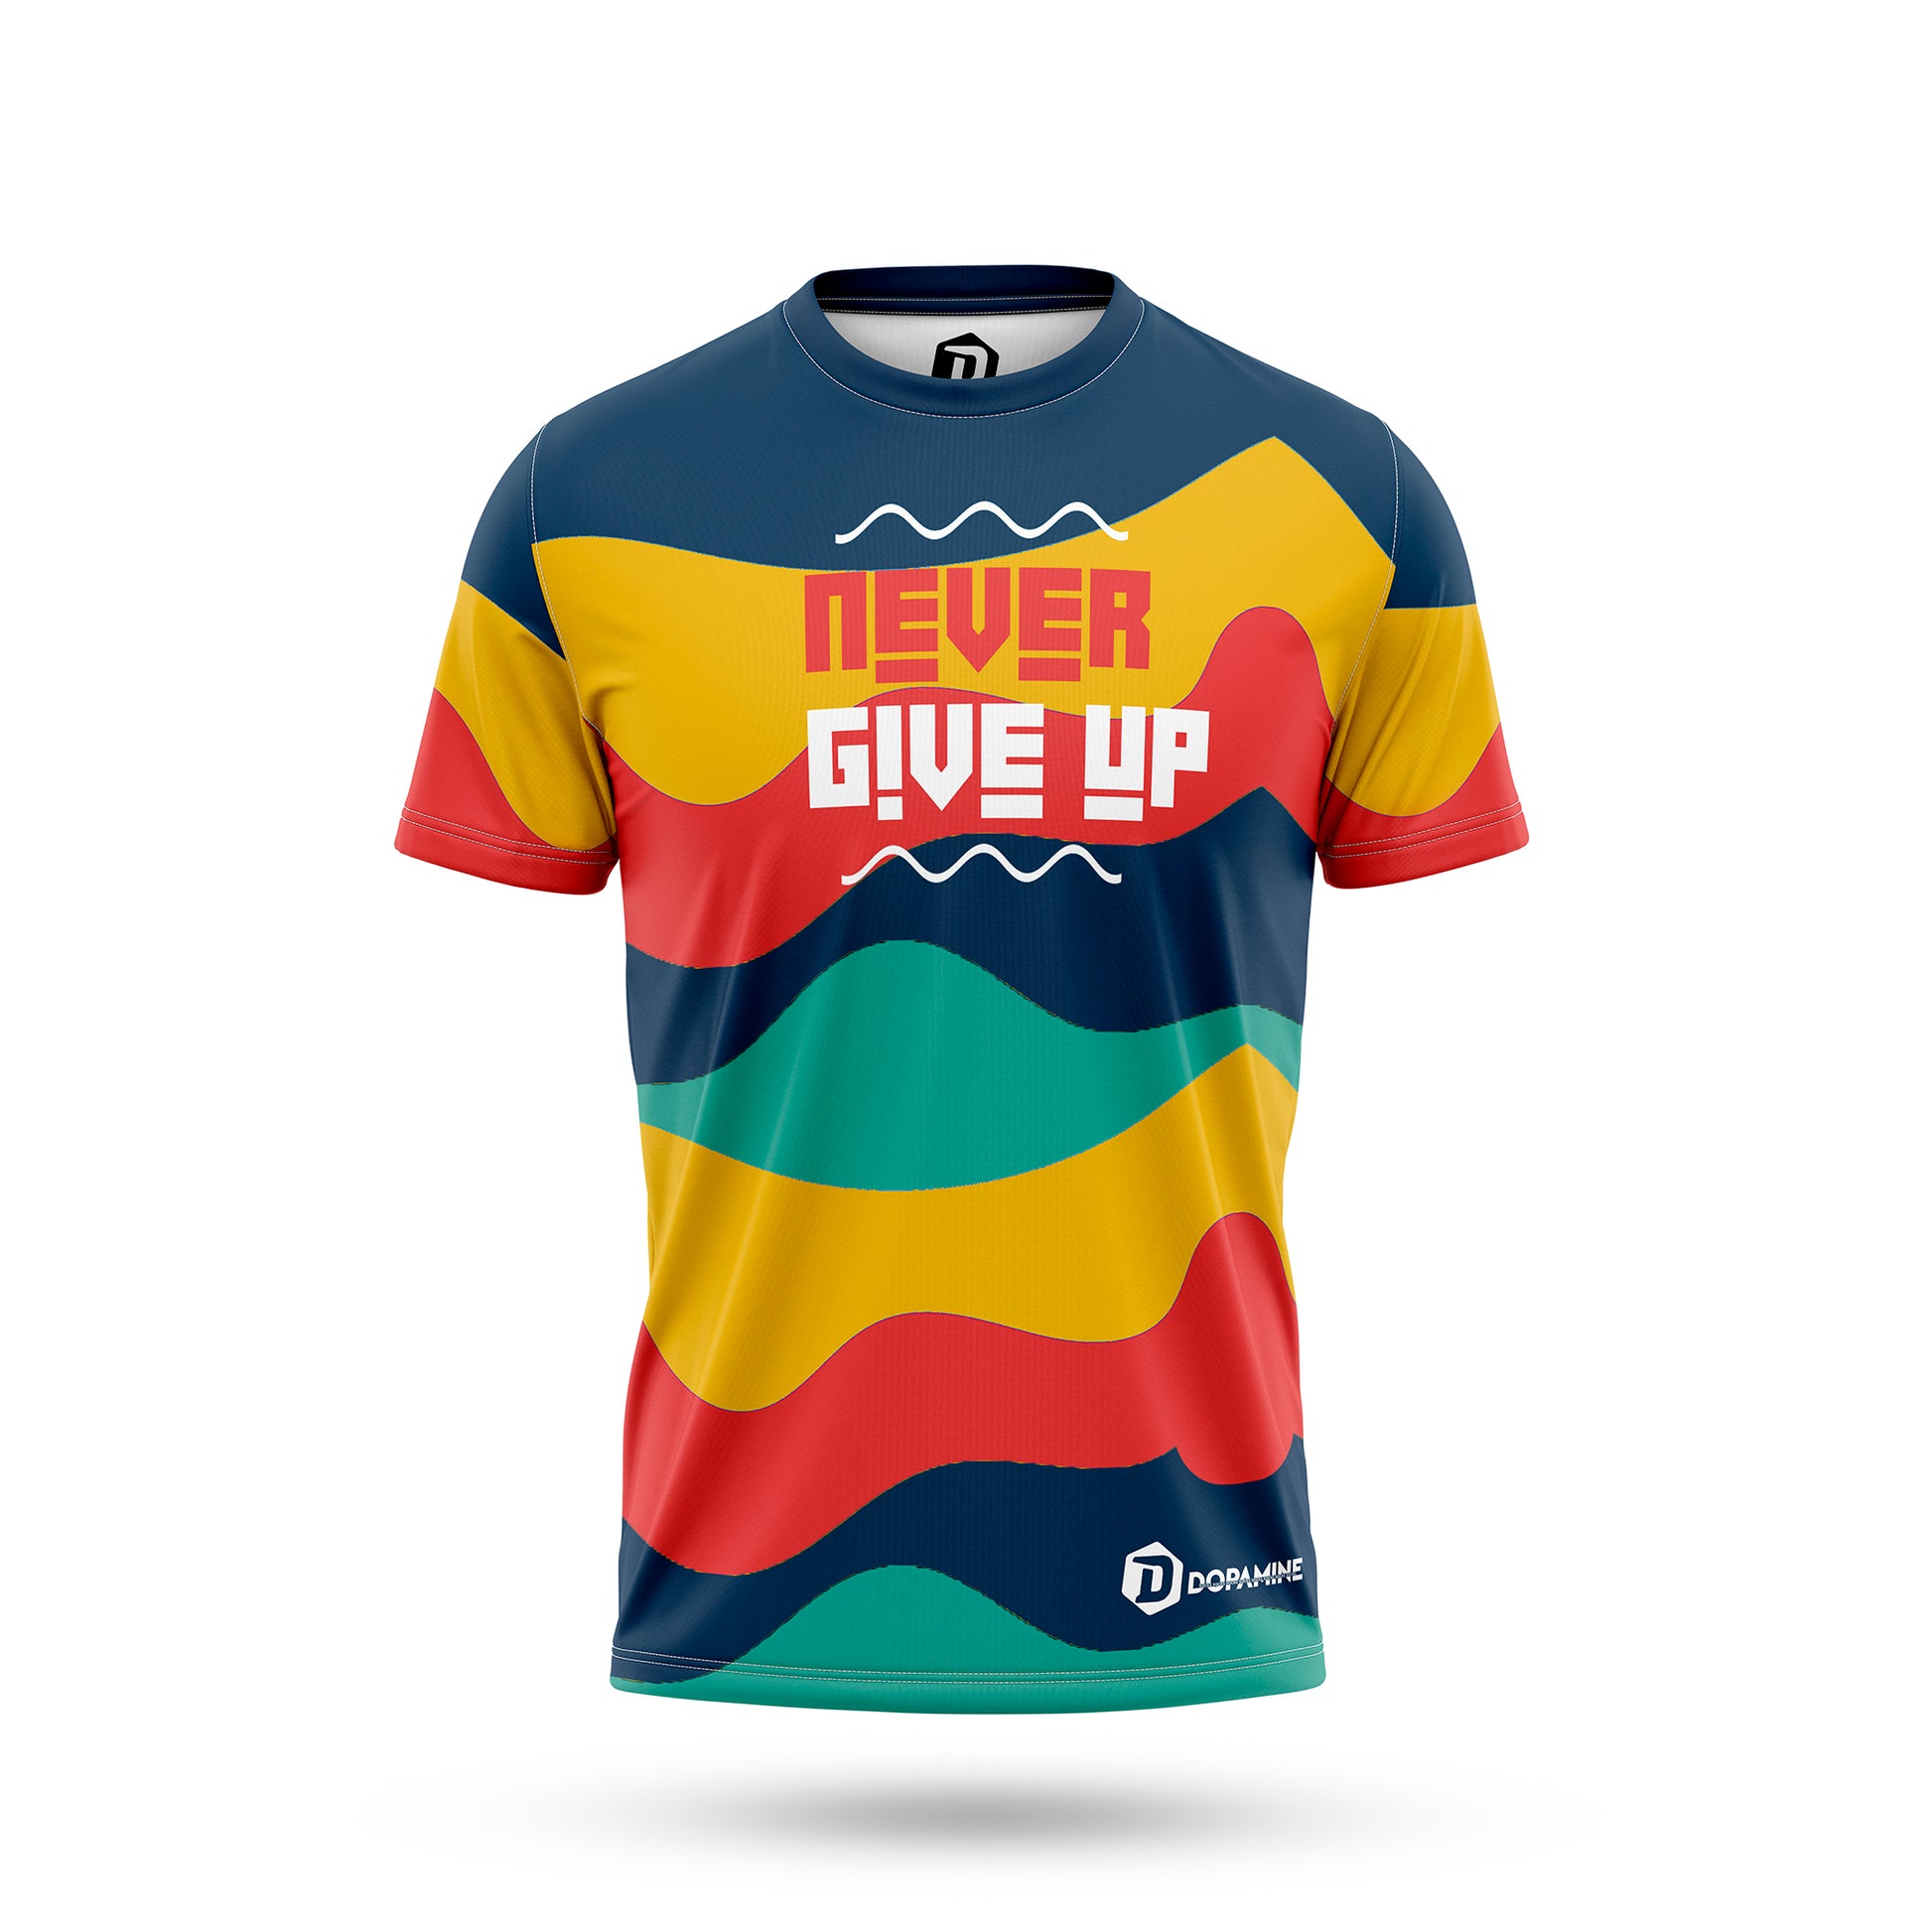 Camiseta técnica NEVER GIVE UP ™ - DOPAMINEOFICIAL